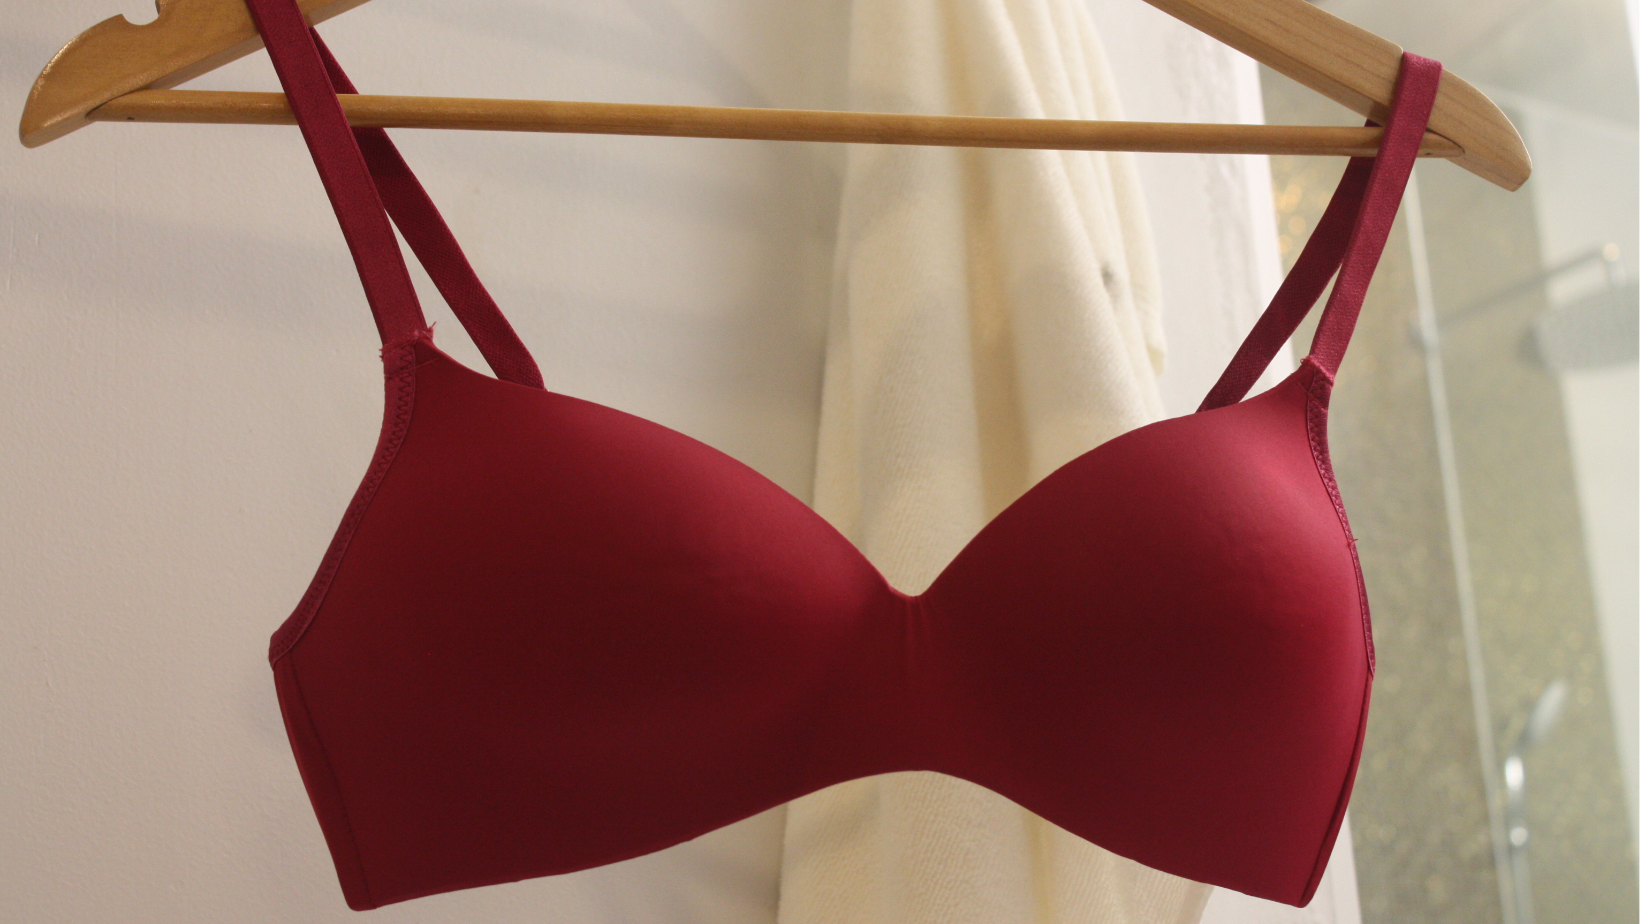 Smooth, seamless, and invisible: The T-shirt bra is a style staple. ​